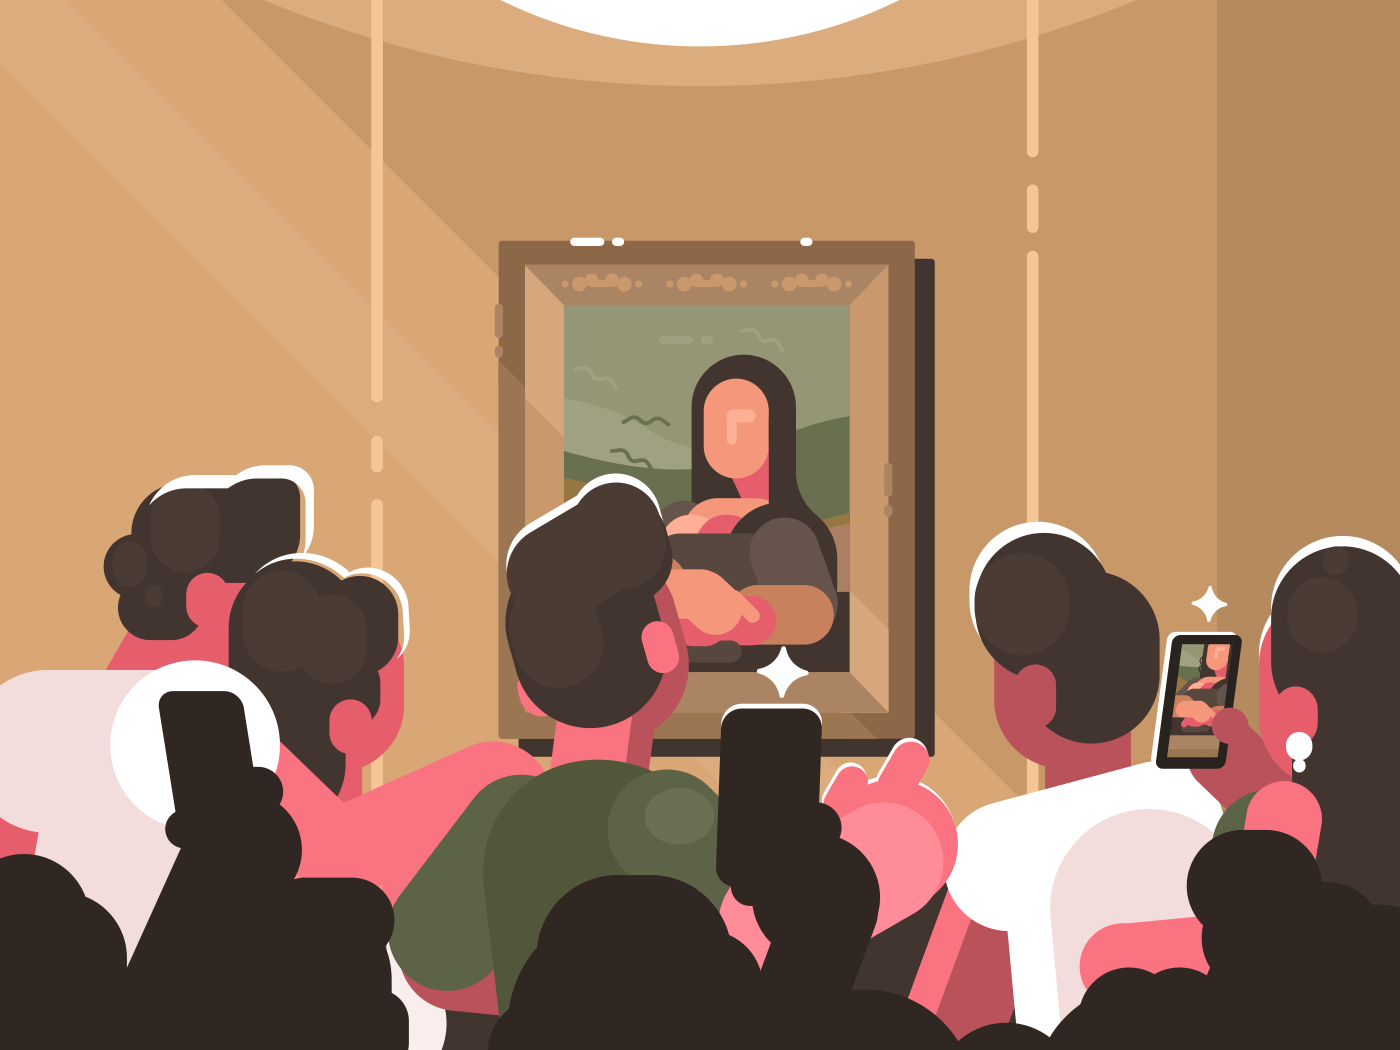 Mona Lisa painting at exhibition in picture gallery. Group of visitors photographing a work of art. Vector illustration